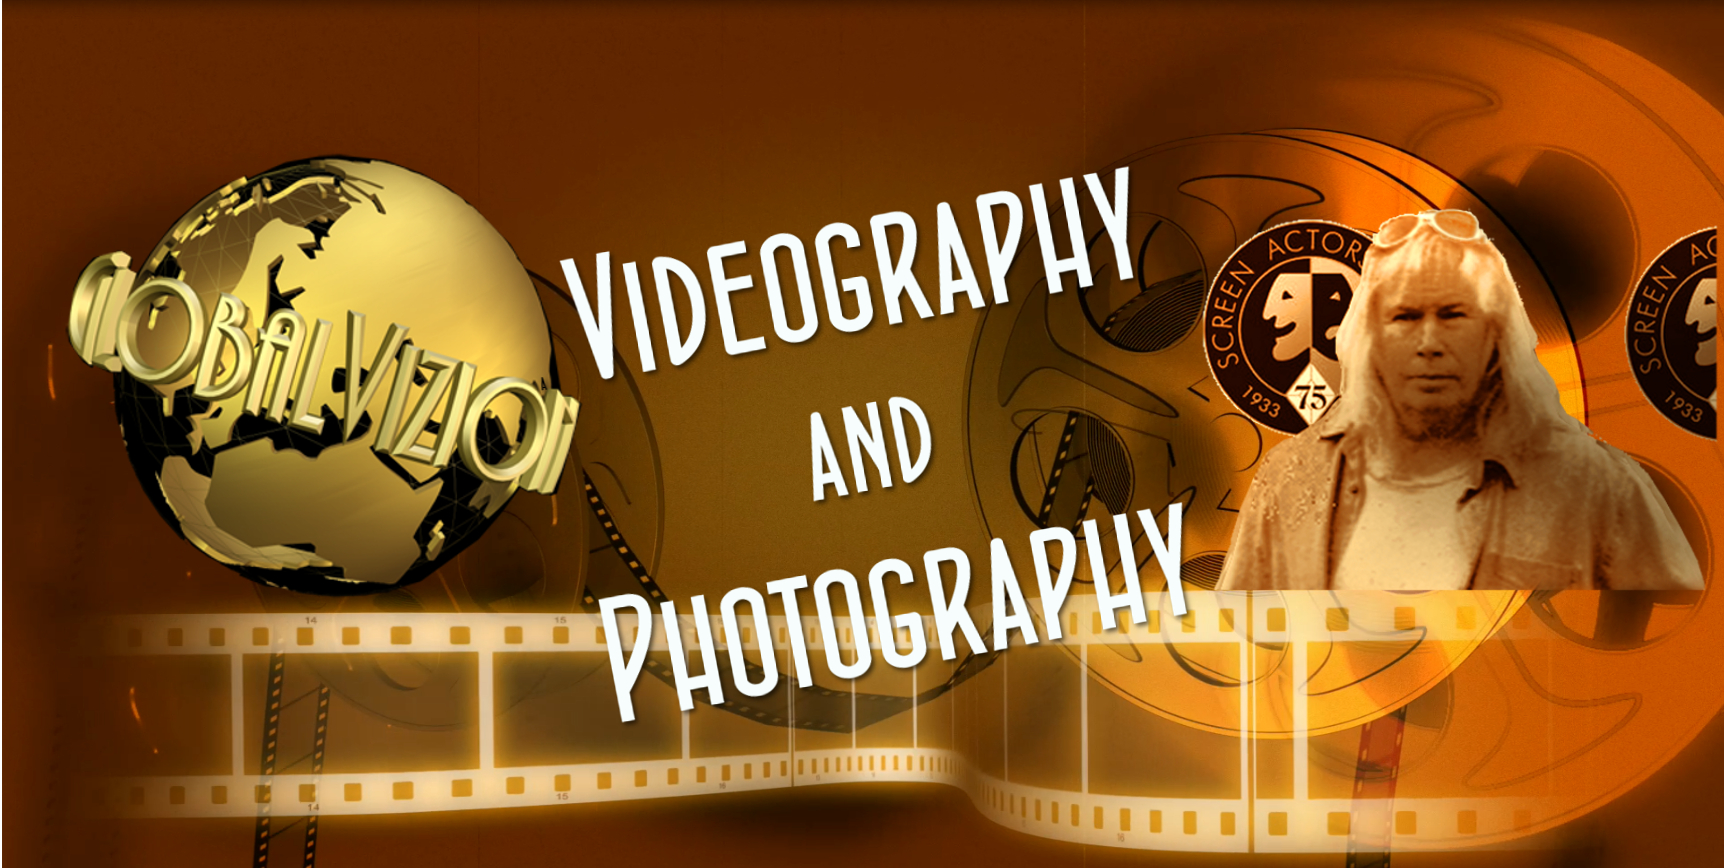 Affordable Video and Photography promotions